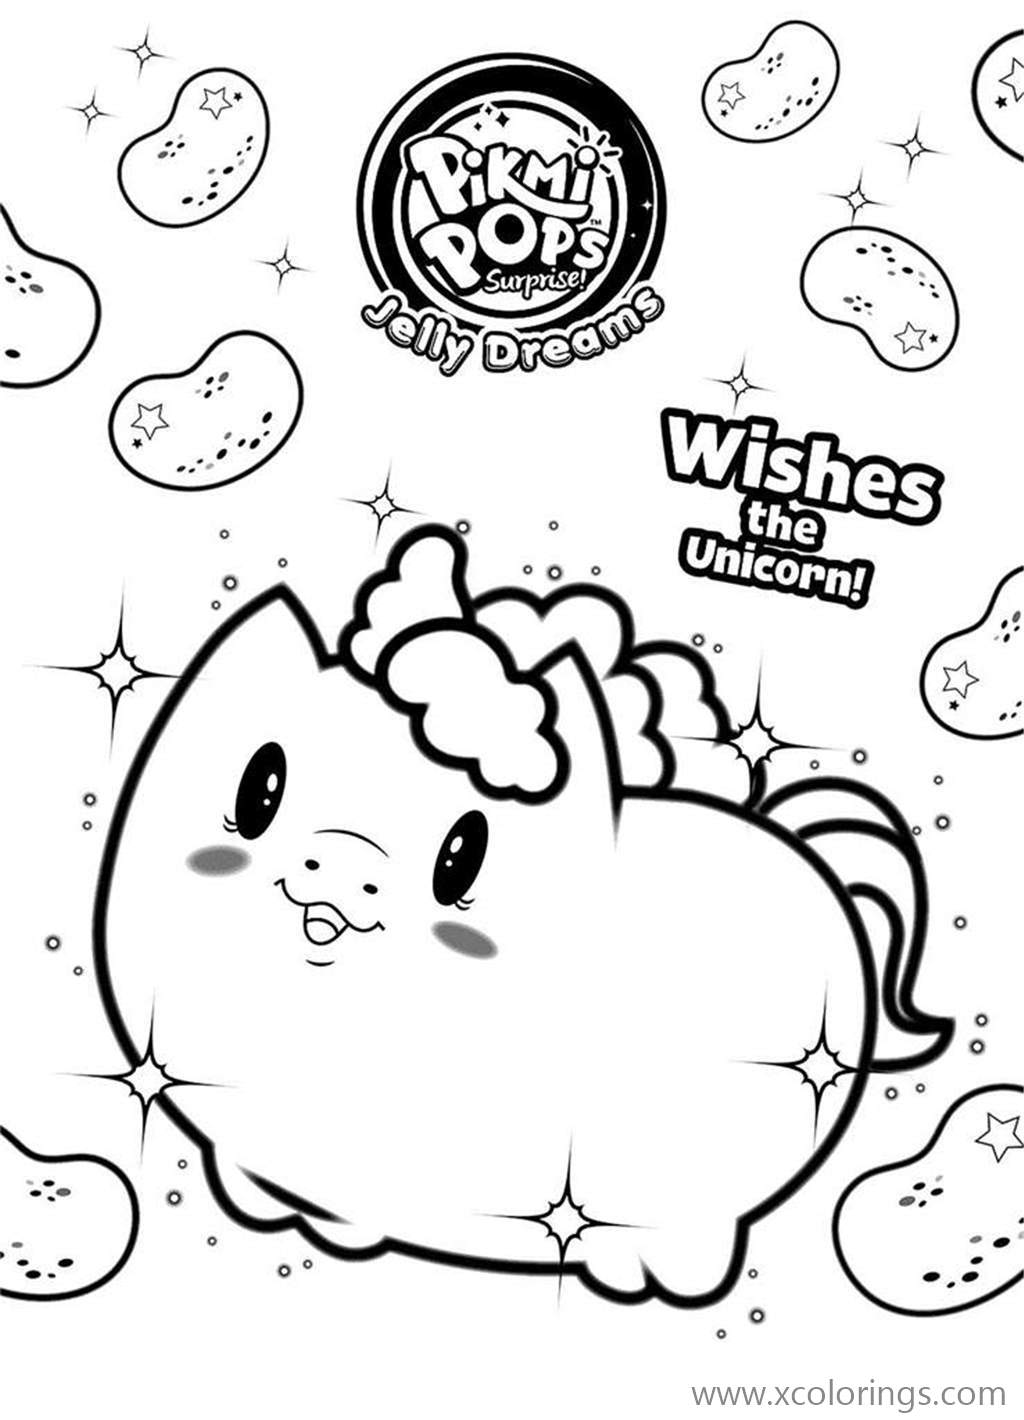 Free Pikmi Pops Coloring Pages Wishes The Unicorn printable